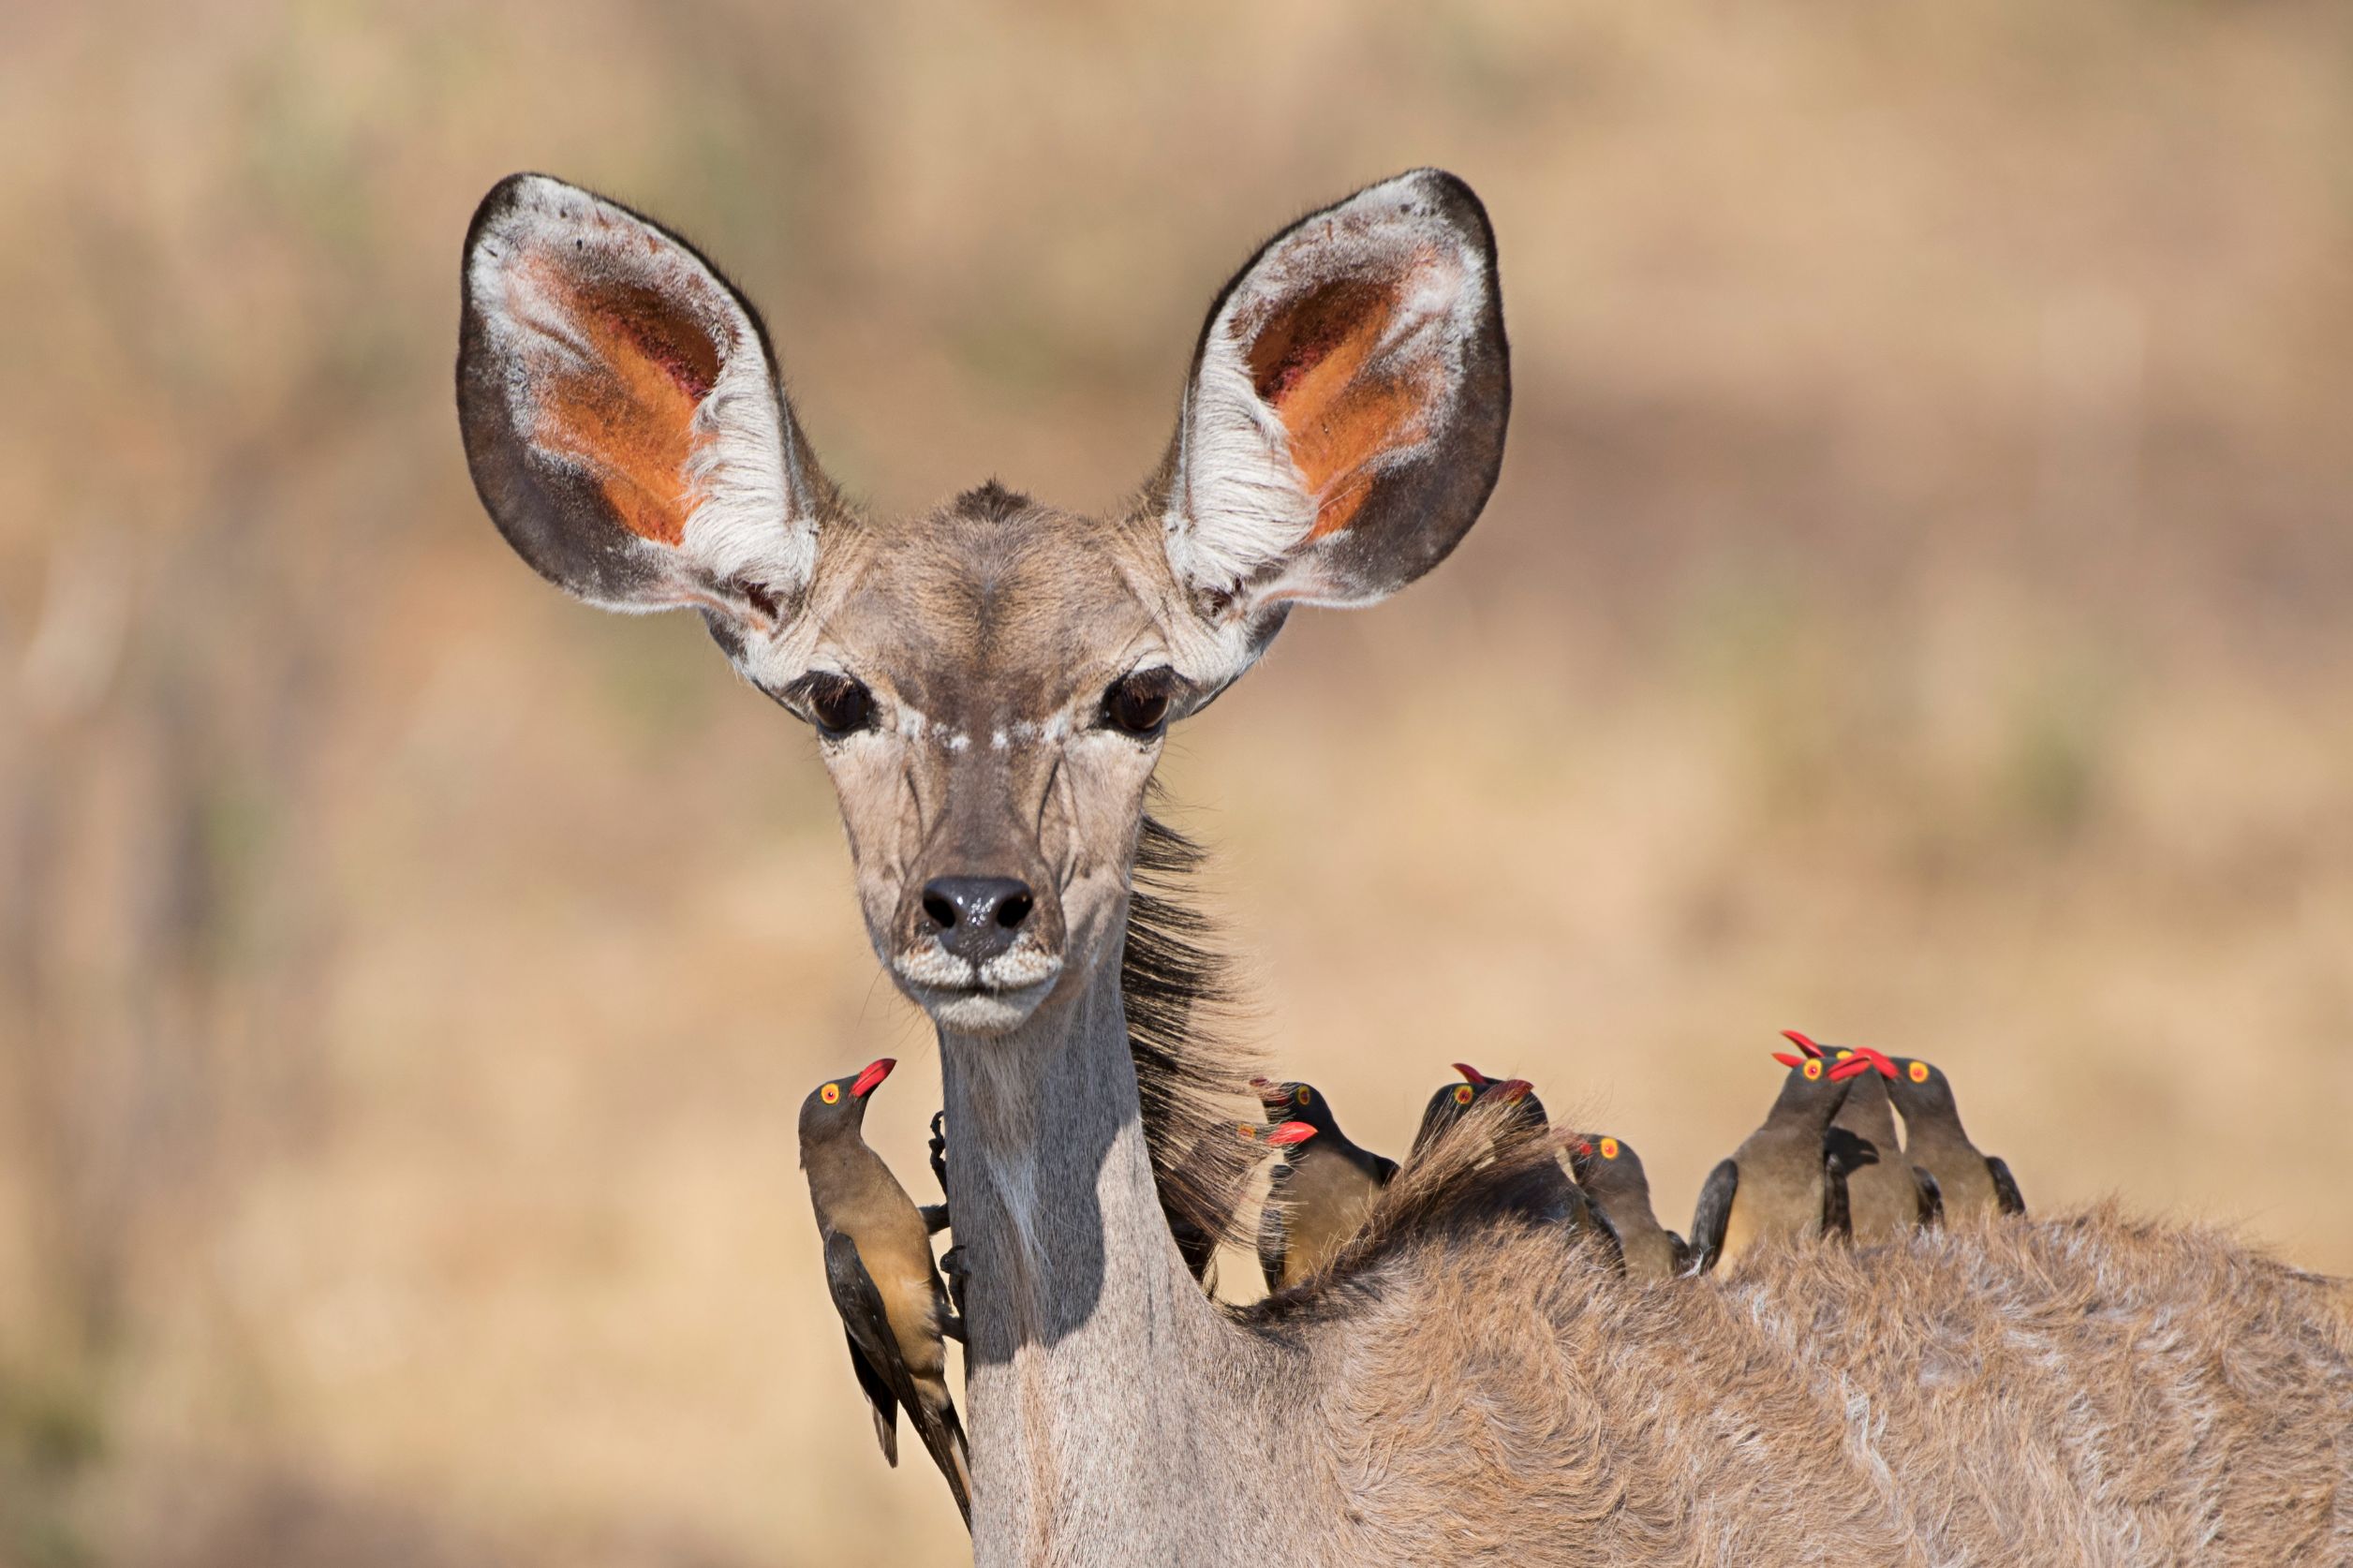 A Female of Kudu carrying a group of 10 Oxpeckers in Caprivi Area, Namibia